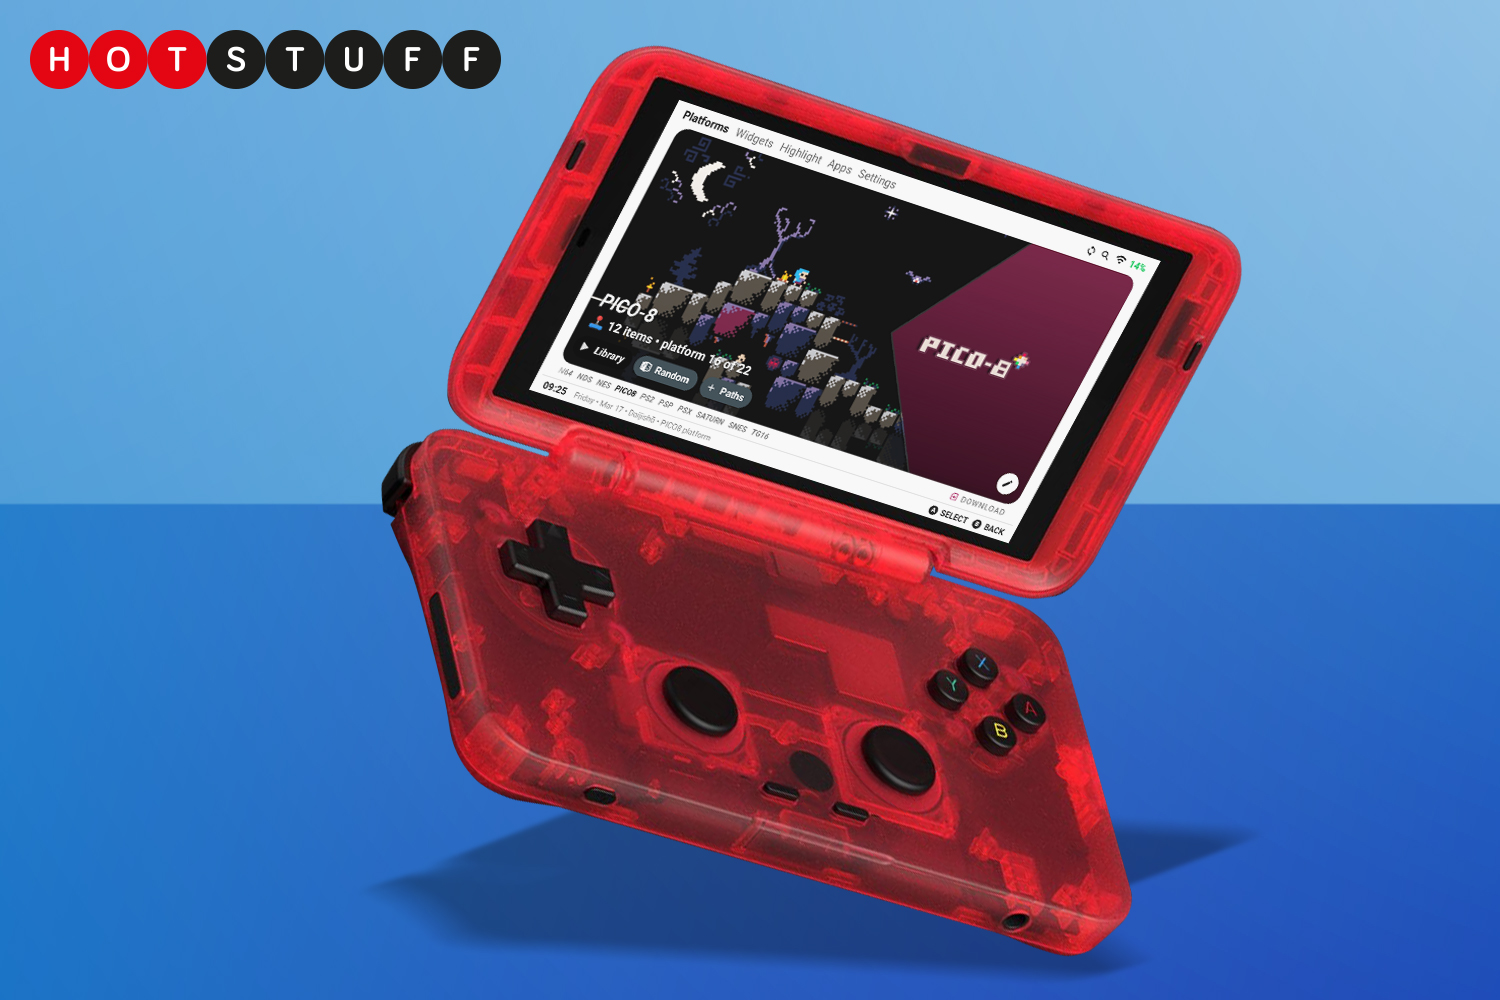 The Retroid Pocket Flip is a clamshell handheld for retrogaming on